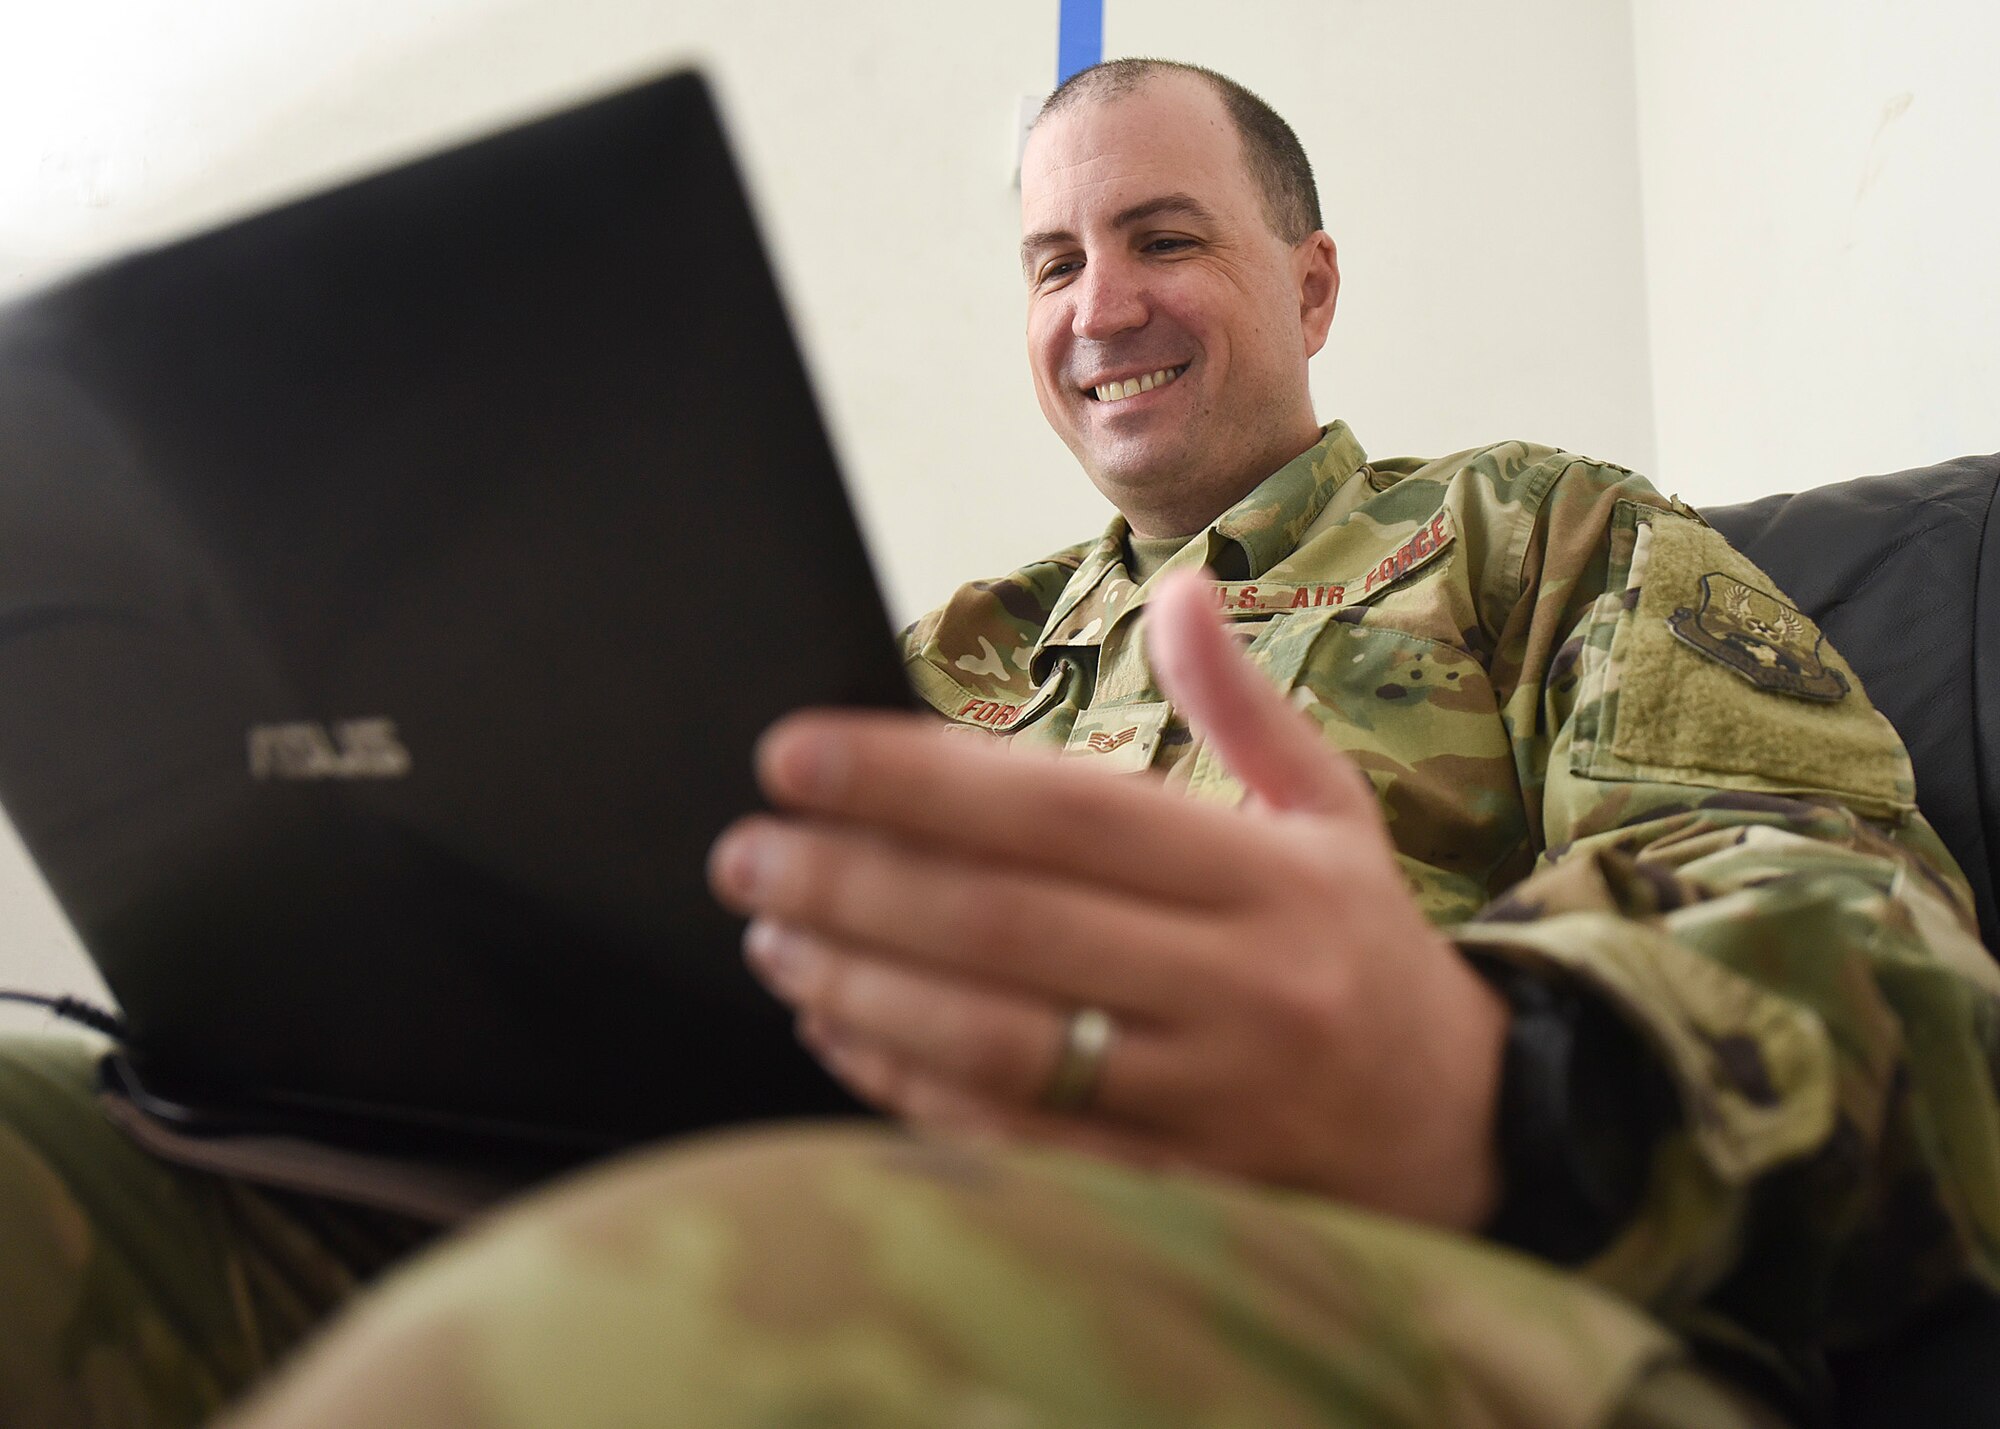 Staff Sgt. Christopher Ford, 379th Air Expeditionary Wing equal opportunity noncommissioned officer in charge, reviews information from a one-on-on interview with service members at Al Dhafra Air Base, United Arab Emirates, Sept. 10, 2018. The mission of EO includes enforcing a zero tolerance policy for unlawful discrimination as well as fostering positive human relations environments across squadrons, groups and wings.